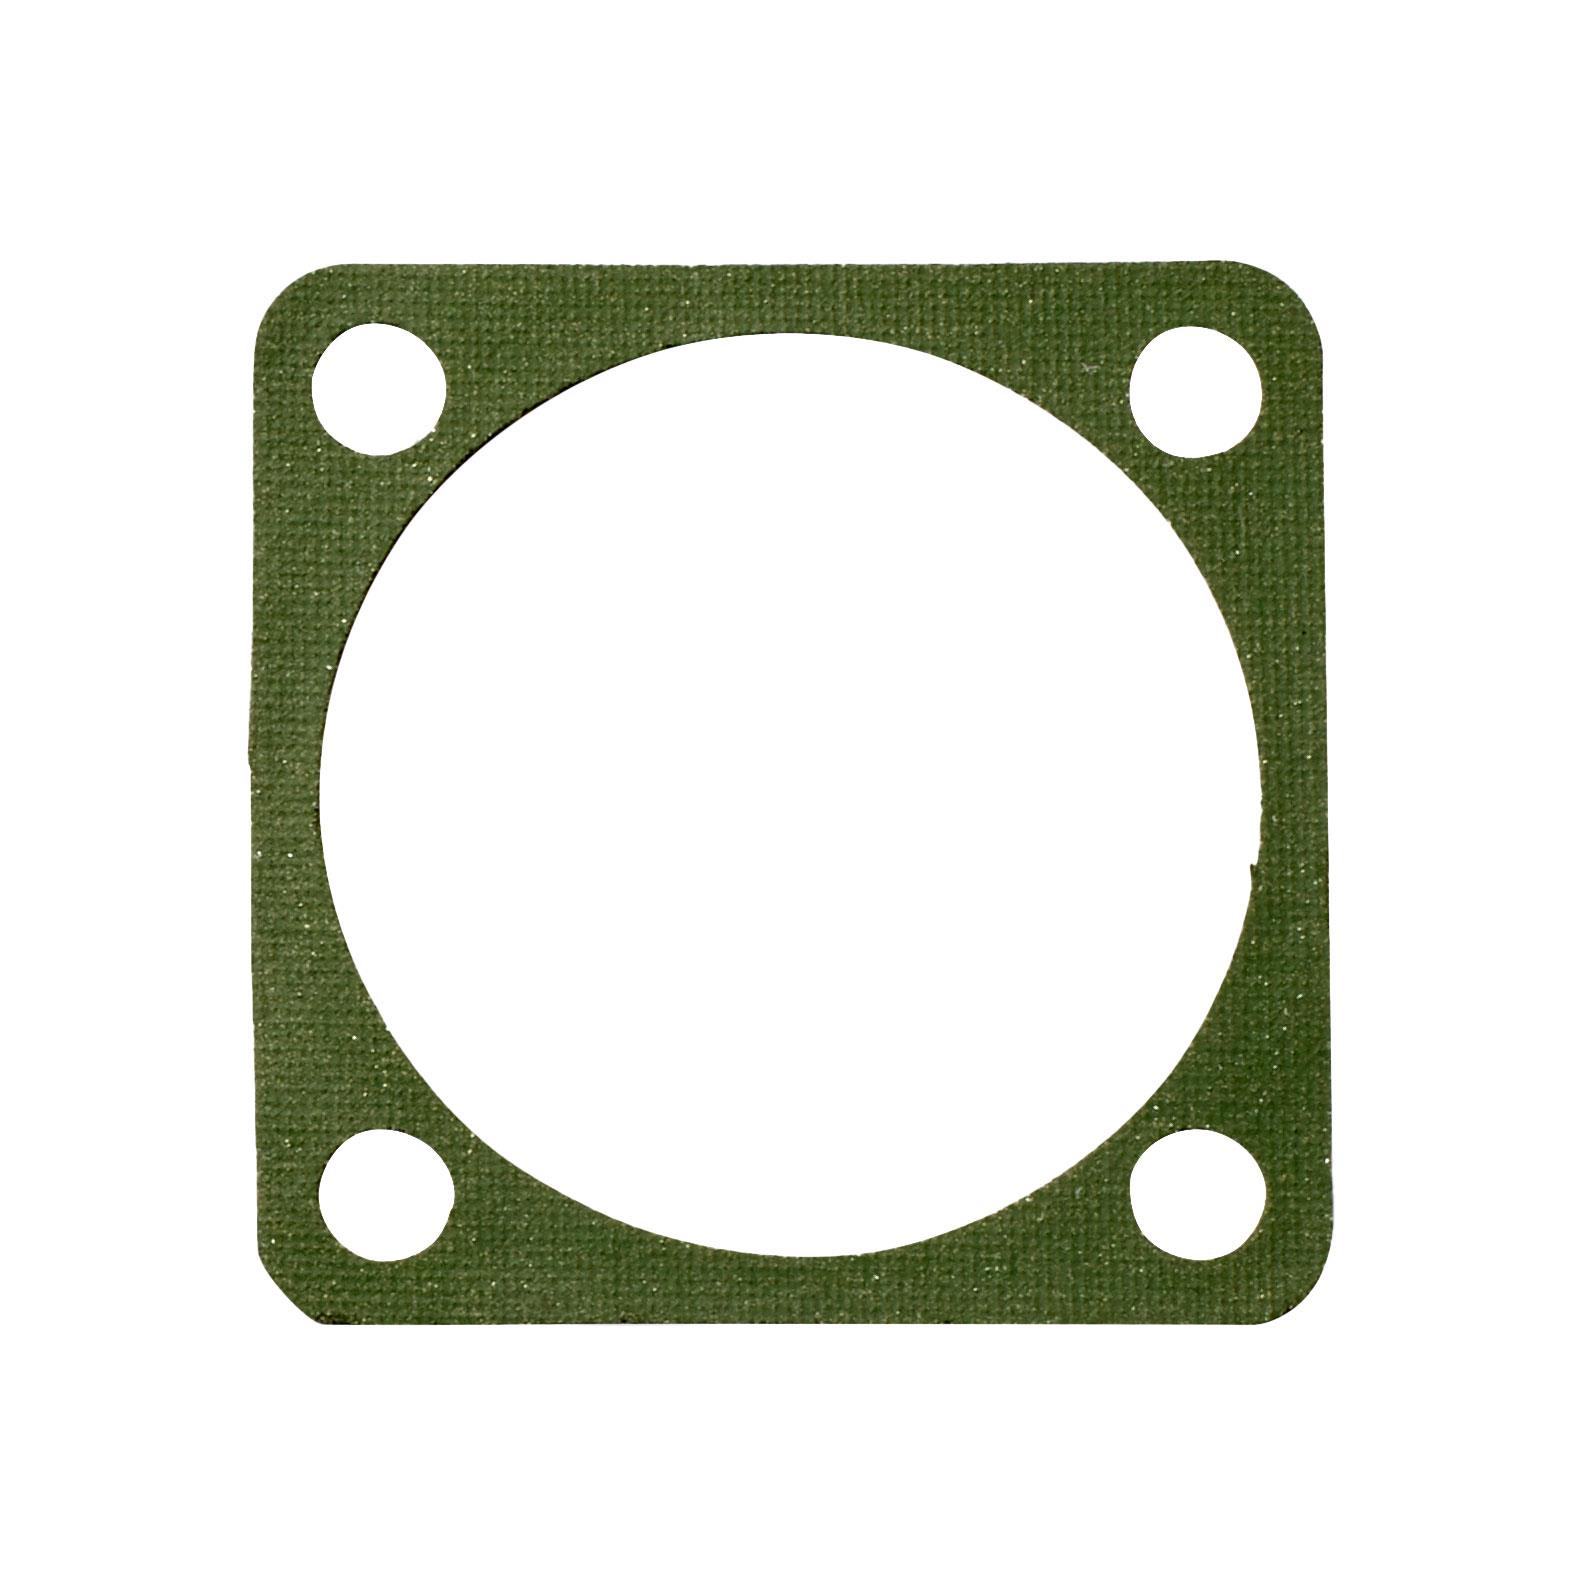 【VG9694006A015A】ELECTRICALLY CONDUCTIVE GASKETS